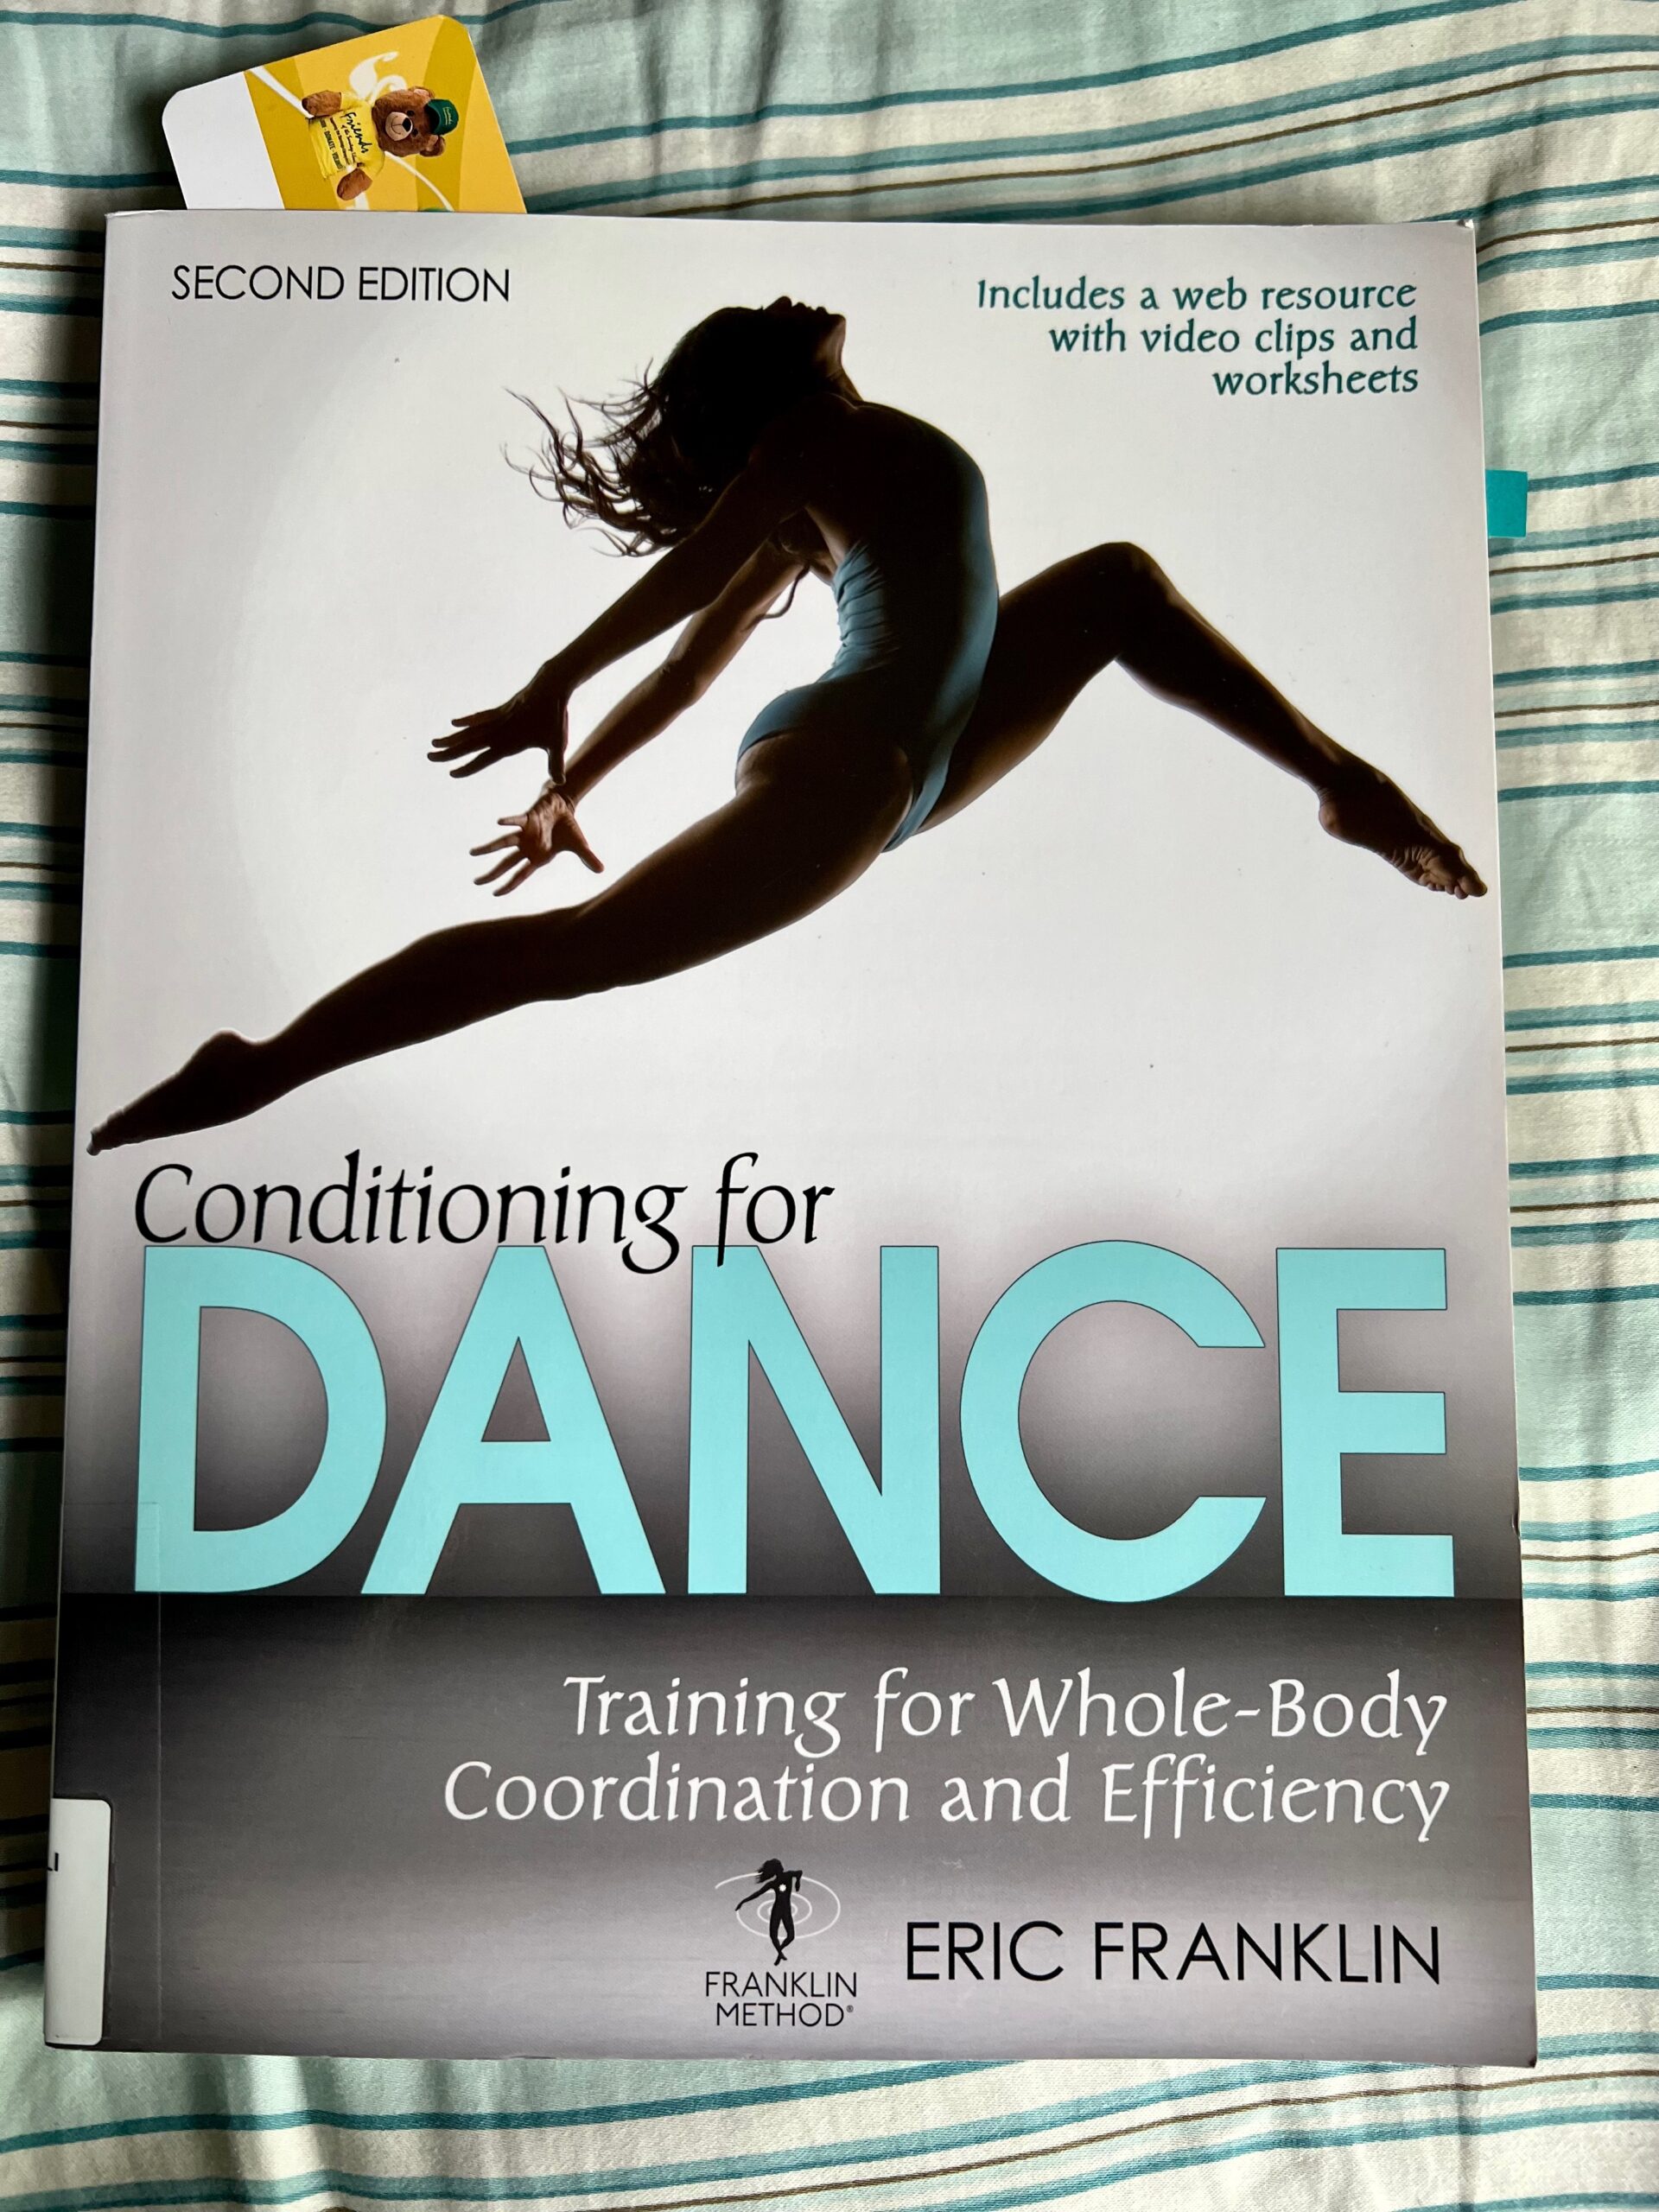 Conditioning for Dance—Training for Whole-Body Coordination and Efficiency